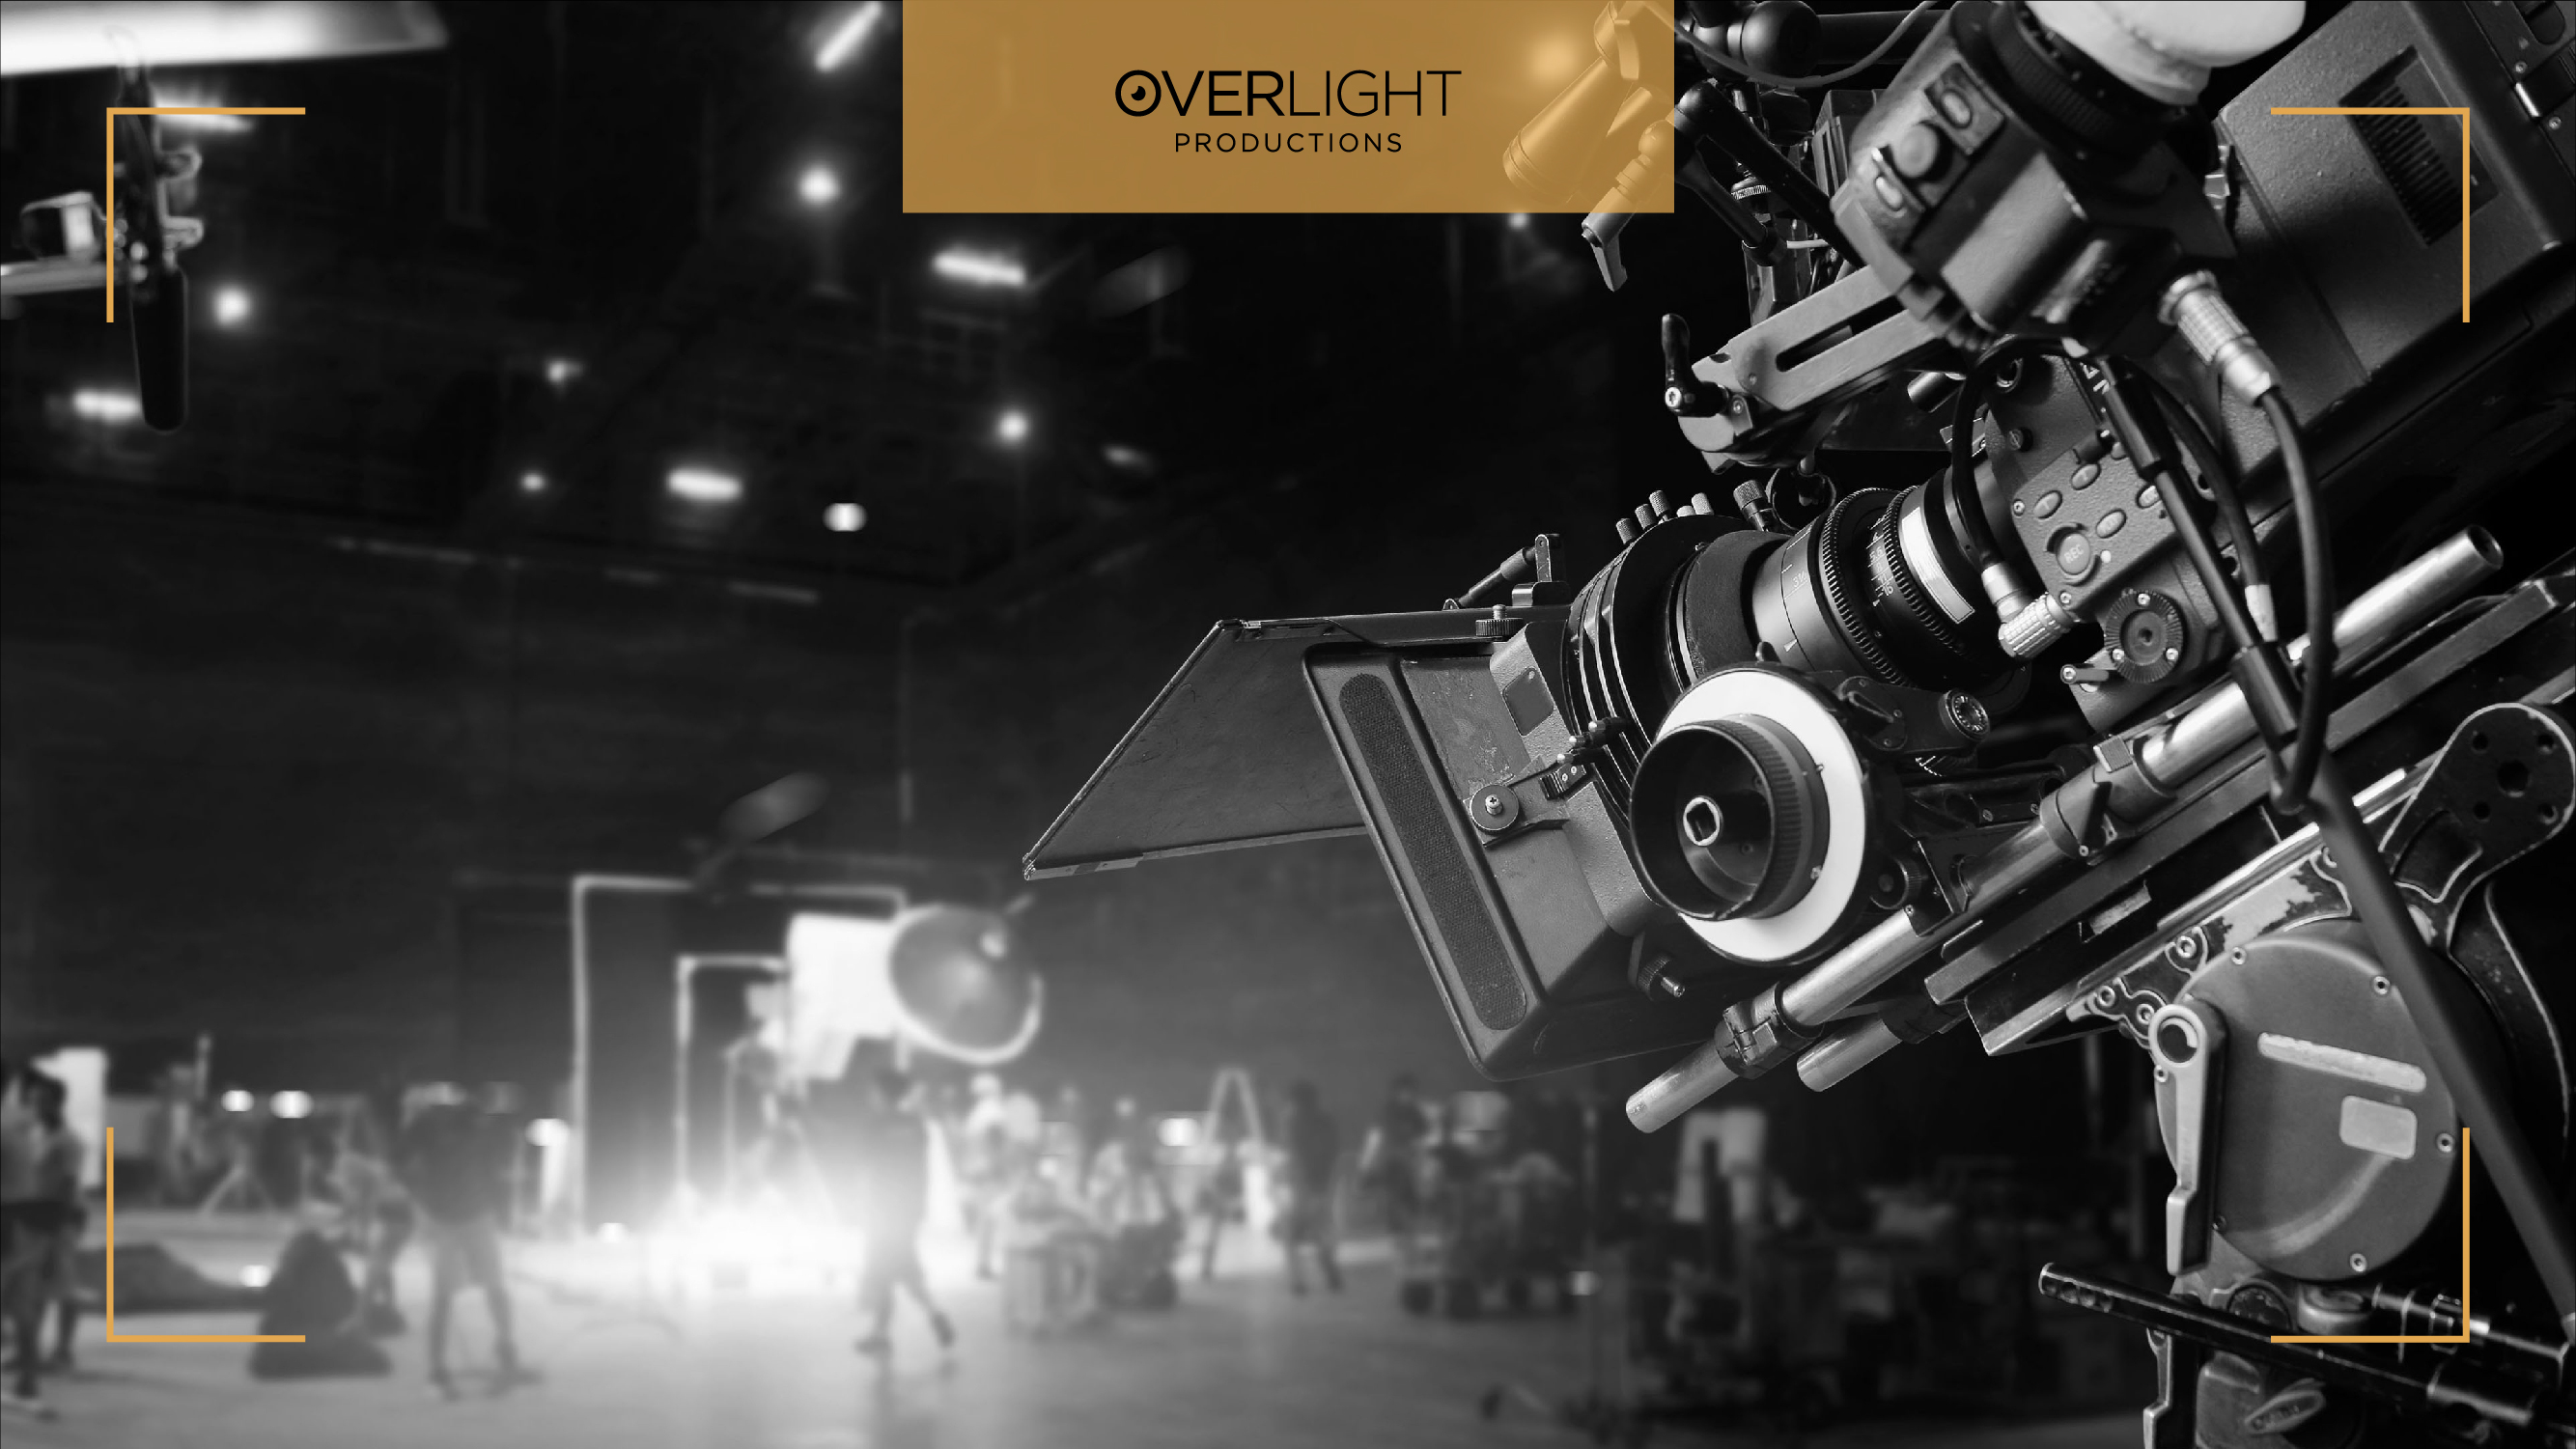 How to Find the Best Video Production Company in Dubai